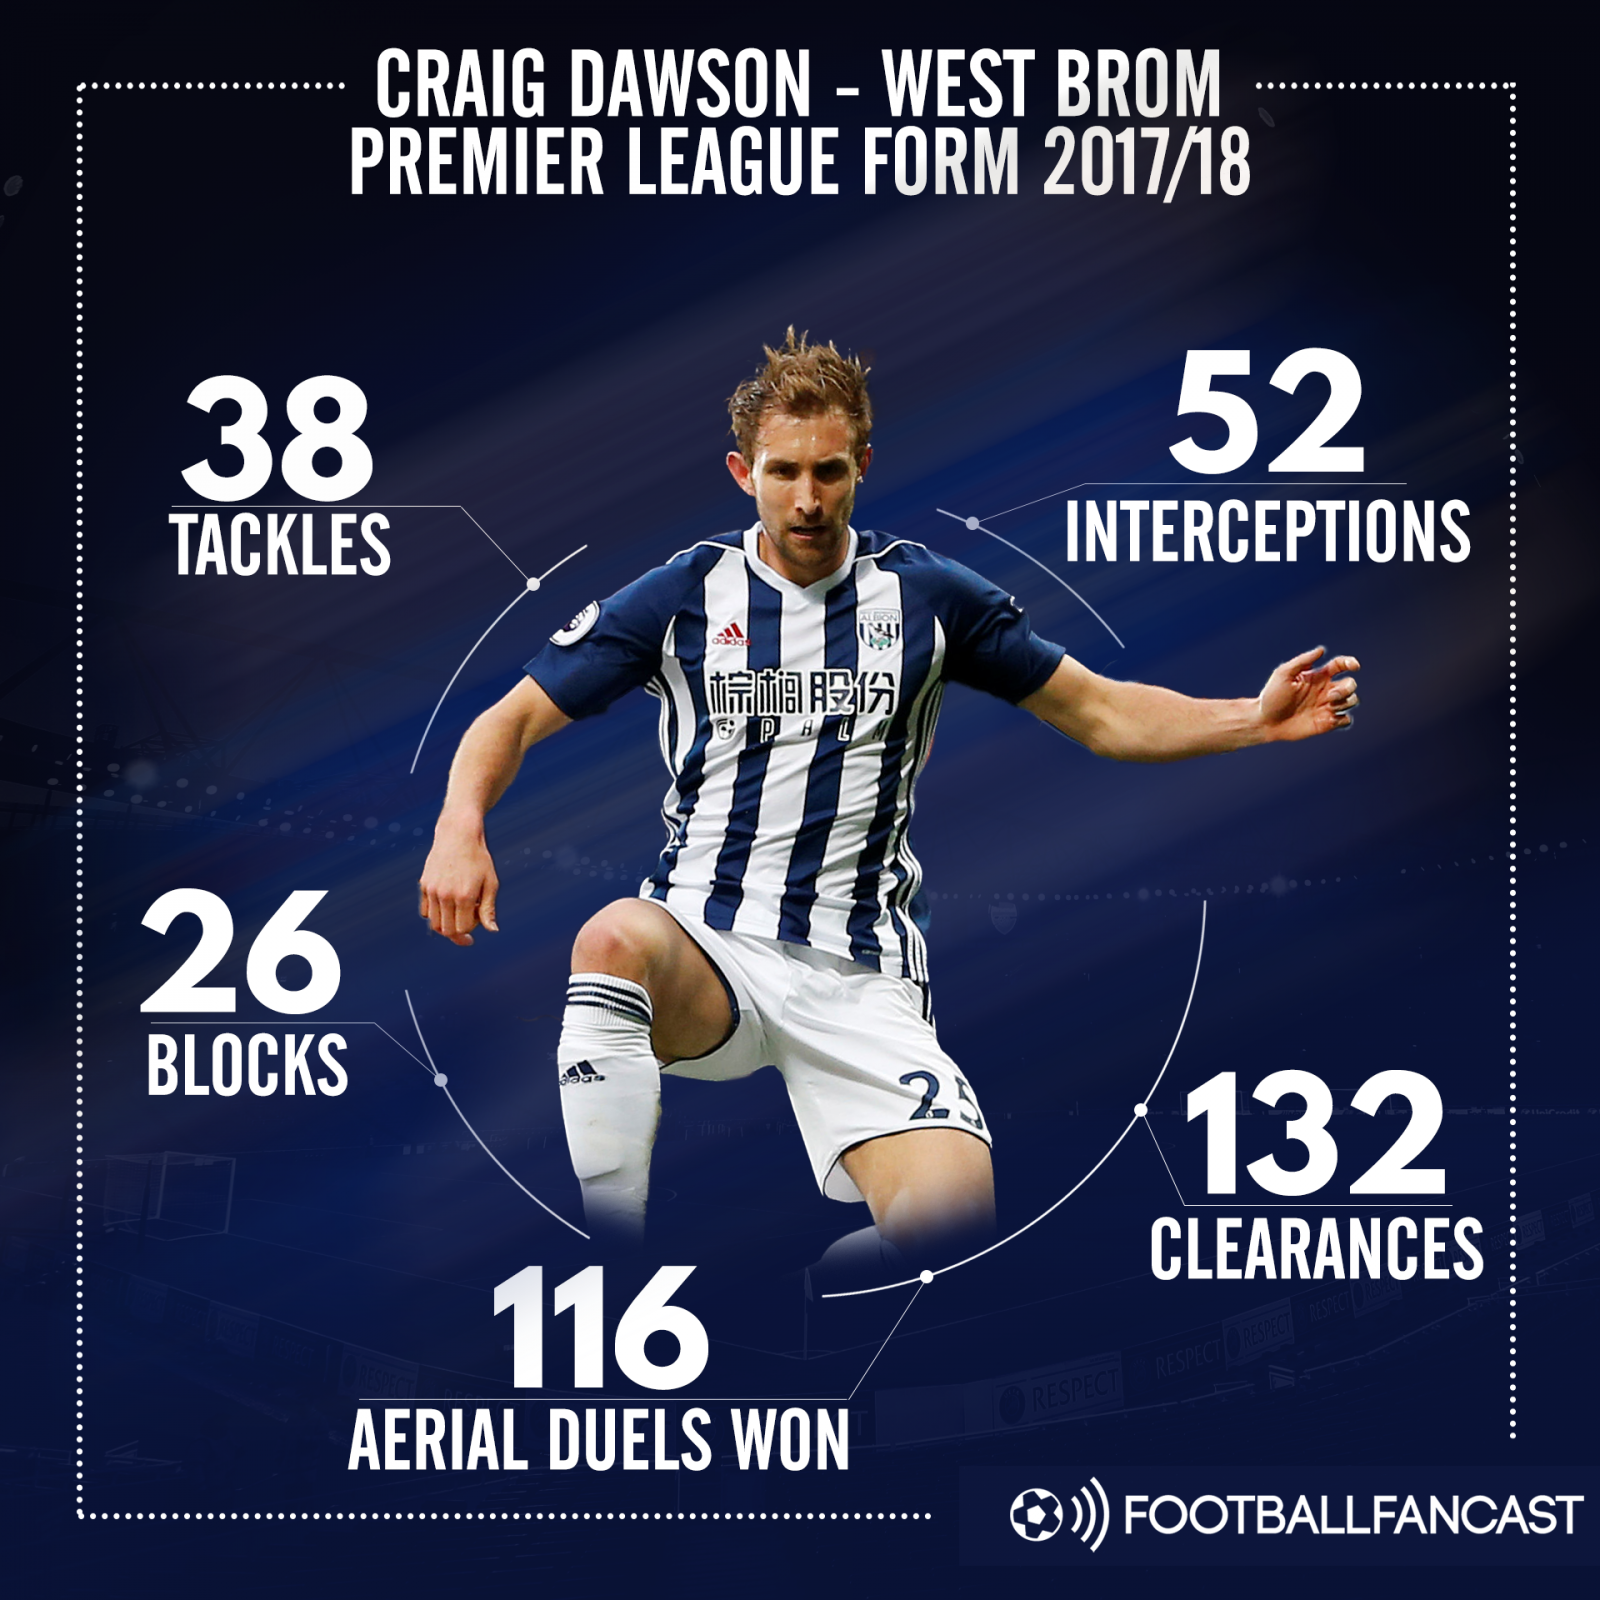 Craig Dawson's stats for West Brom in the 2017-18 Premier League season